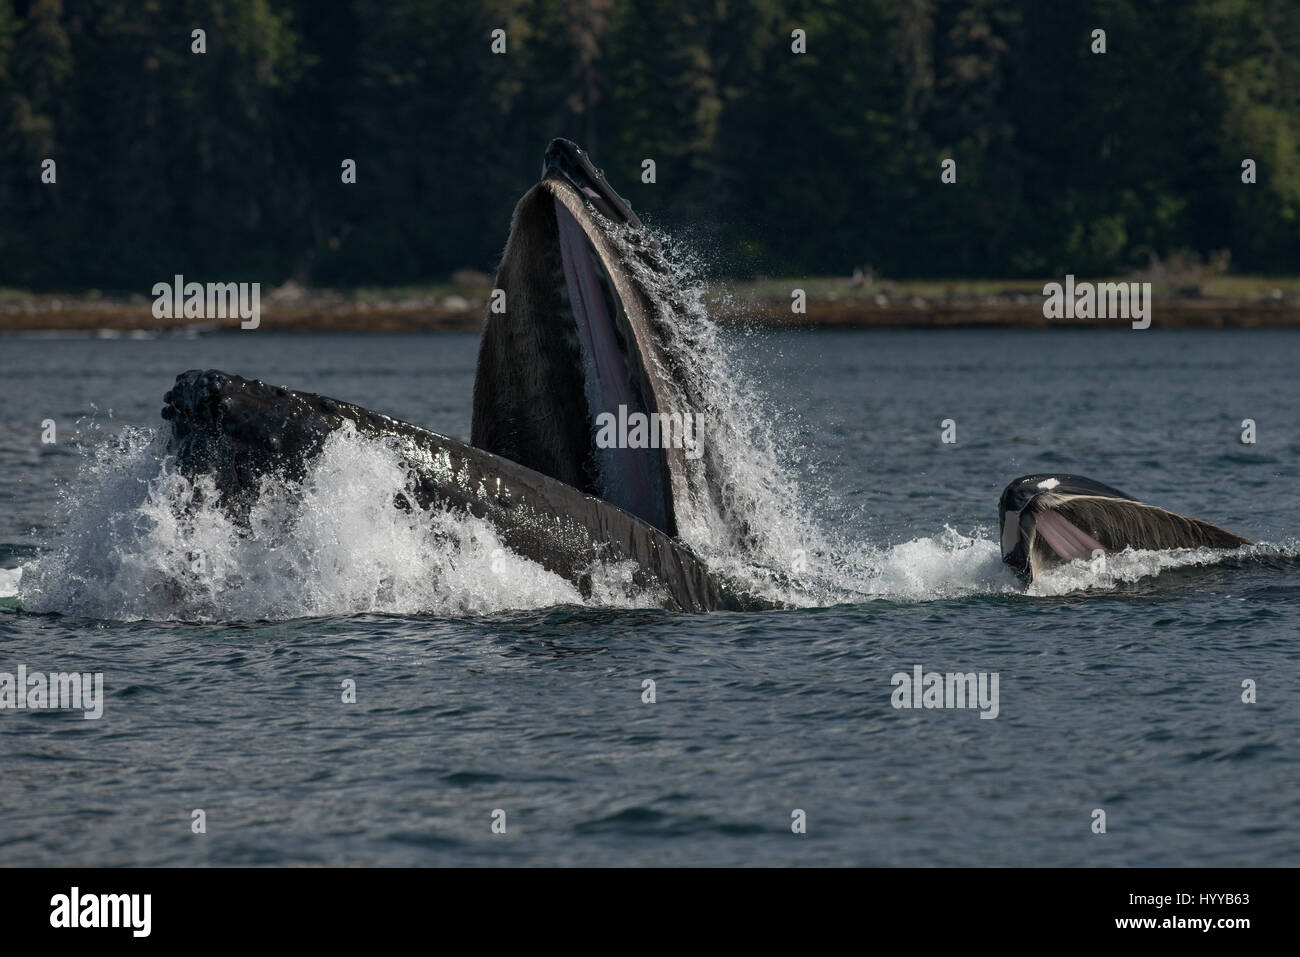 ALASKA, USA: Humpback whales bubble net feeding. SPECTACULAR images of humpback whales appearing to resemble a mountain range as they bubble net feed have been captured. The incredible series of pictures show how the thirty-tonne whales dive underwater to hunt their herring supper and then resurface to quickly gobble up their catch before the fish can make an escape. In another shot, a boat of fishermen watch the spectacle. Another image shows a humpback’s spout disappear high into the clouds. This amazing encounter was captured by American artist and photographer, Scott Methvin (58) in South  Stock Photo